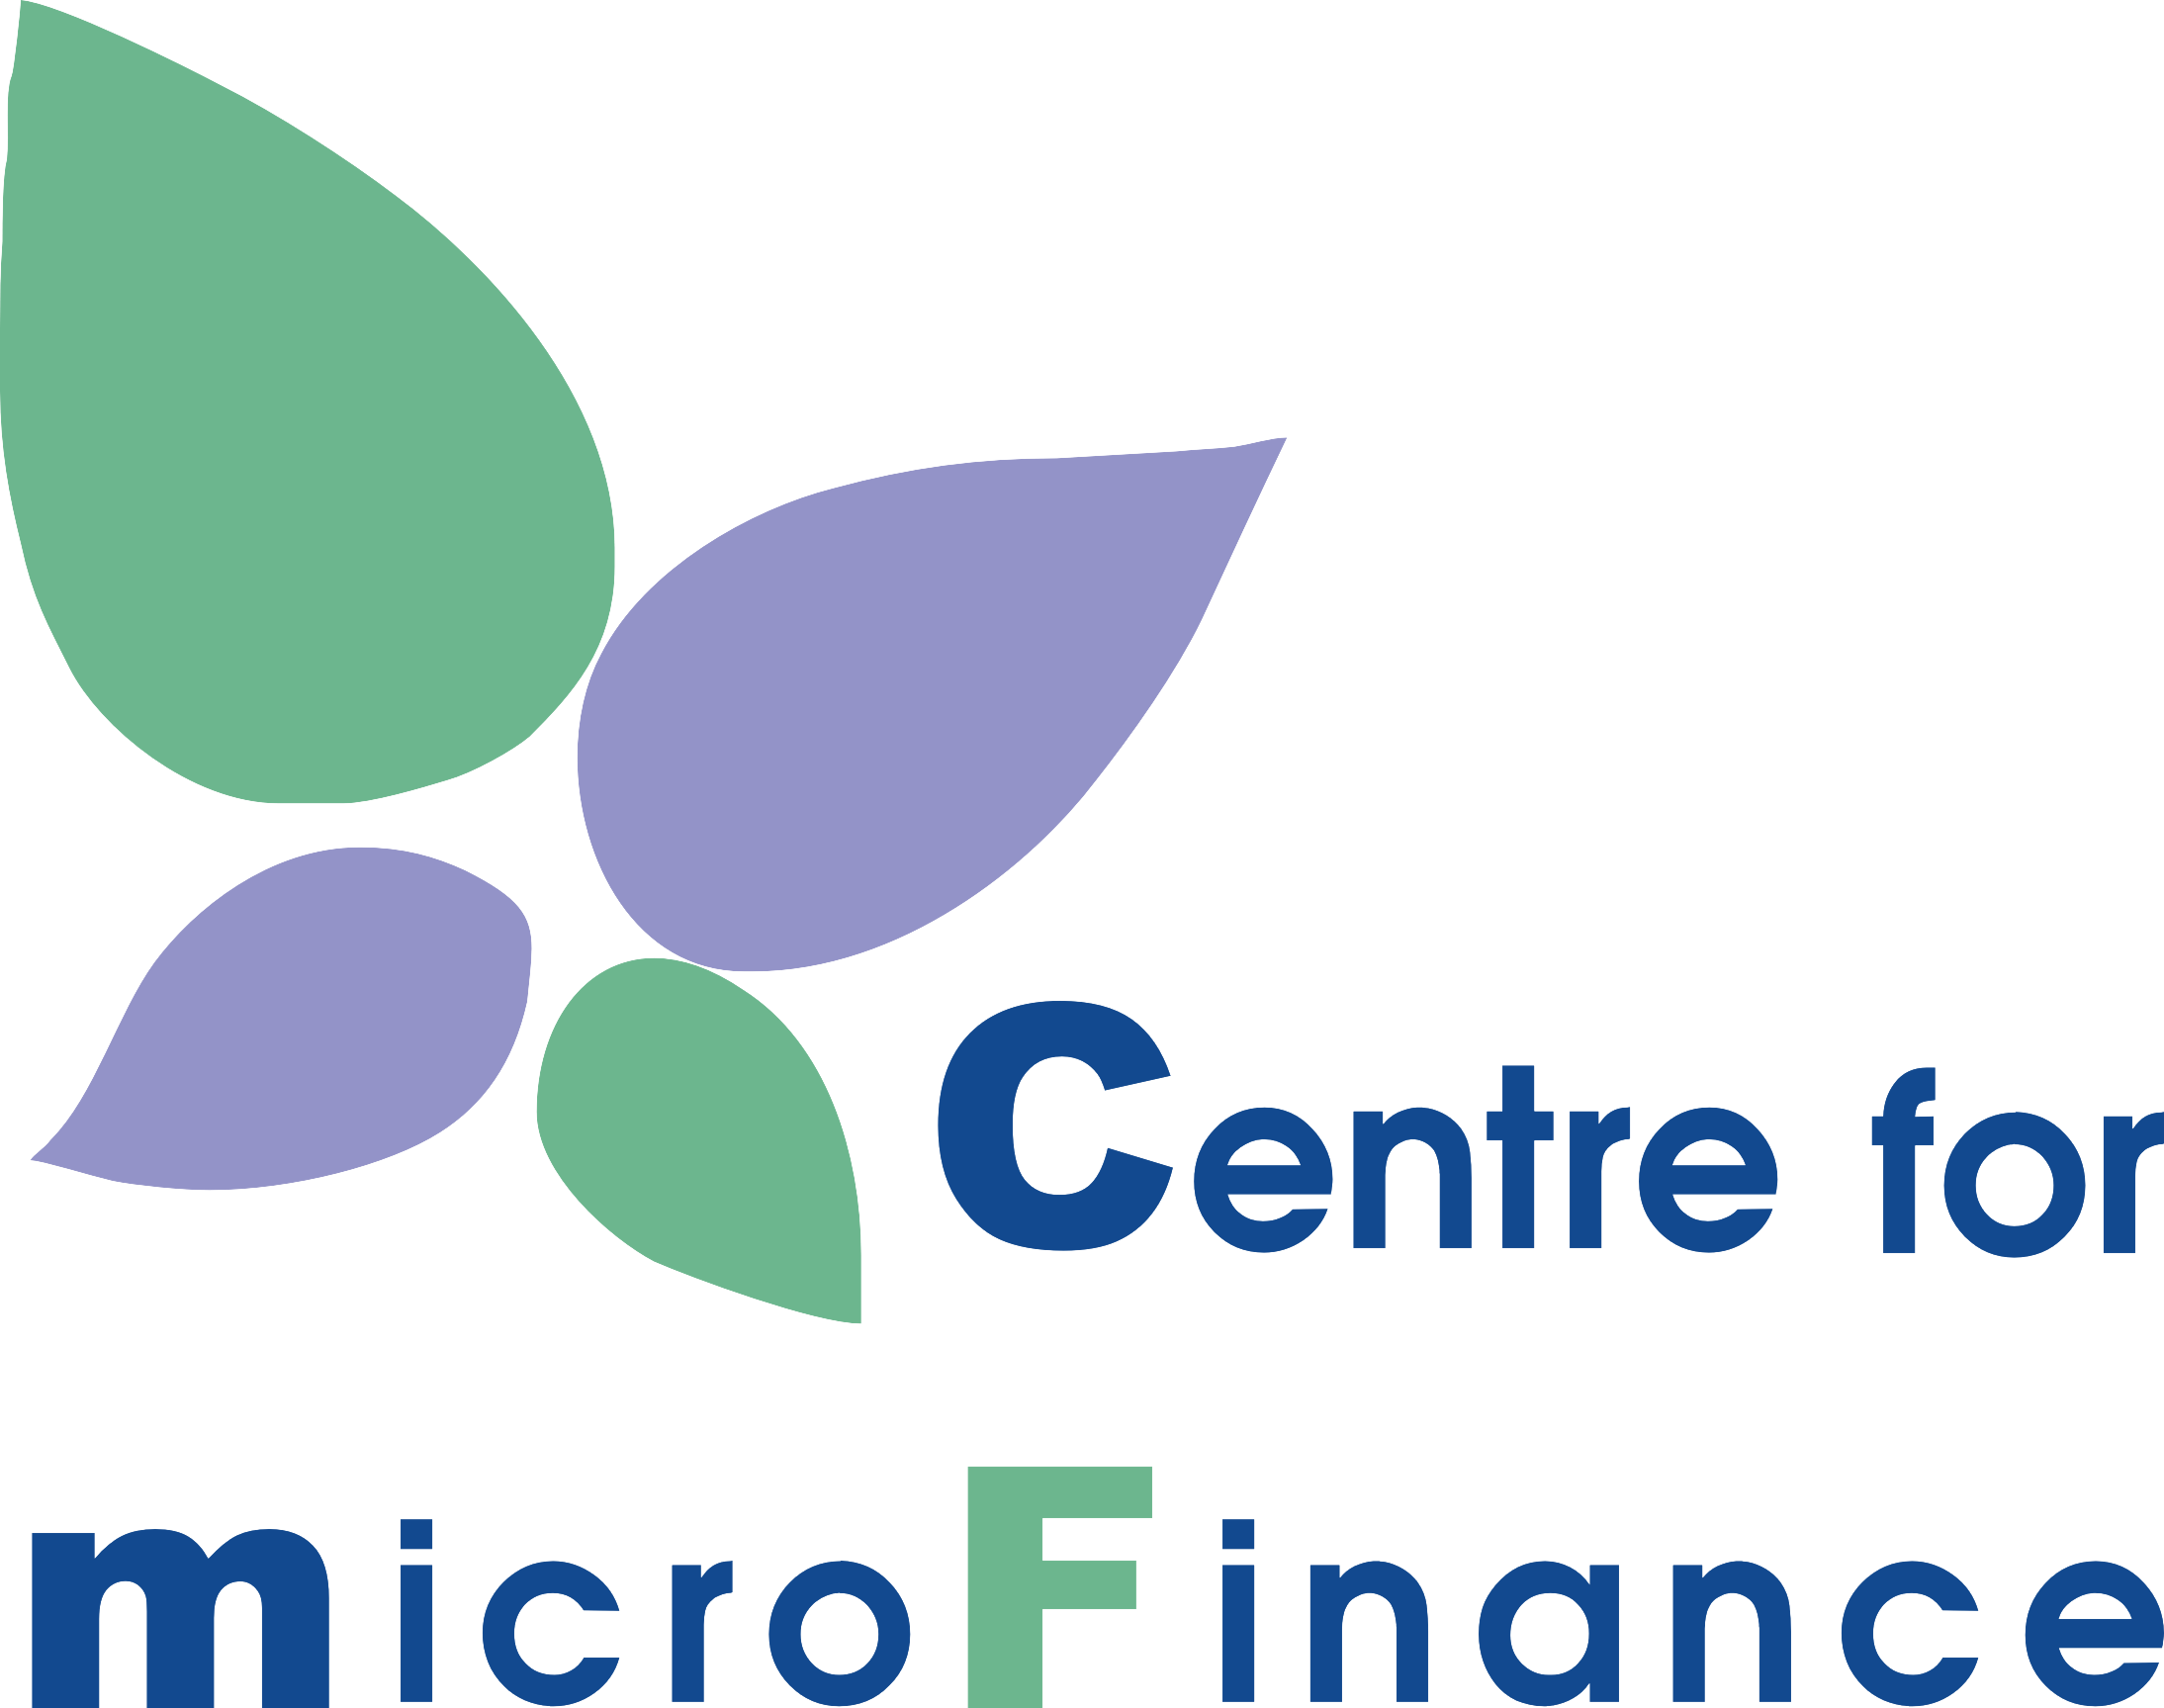 Logo for online micro finance company by Lelst148